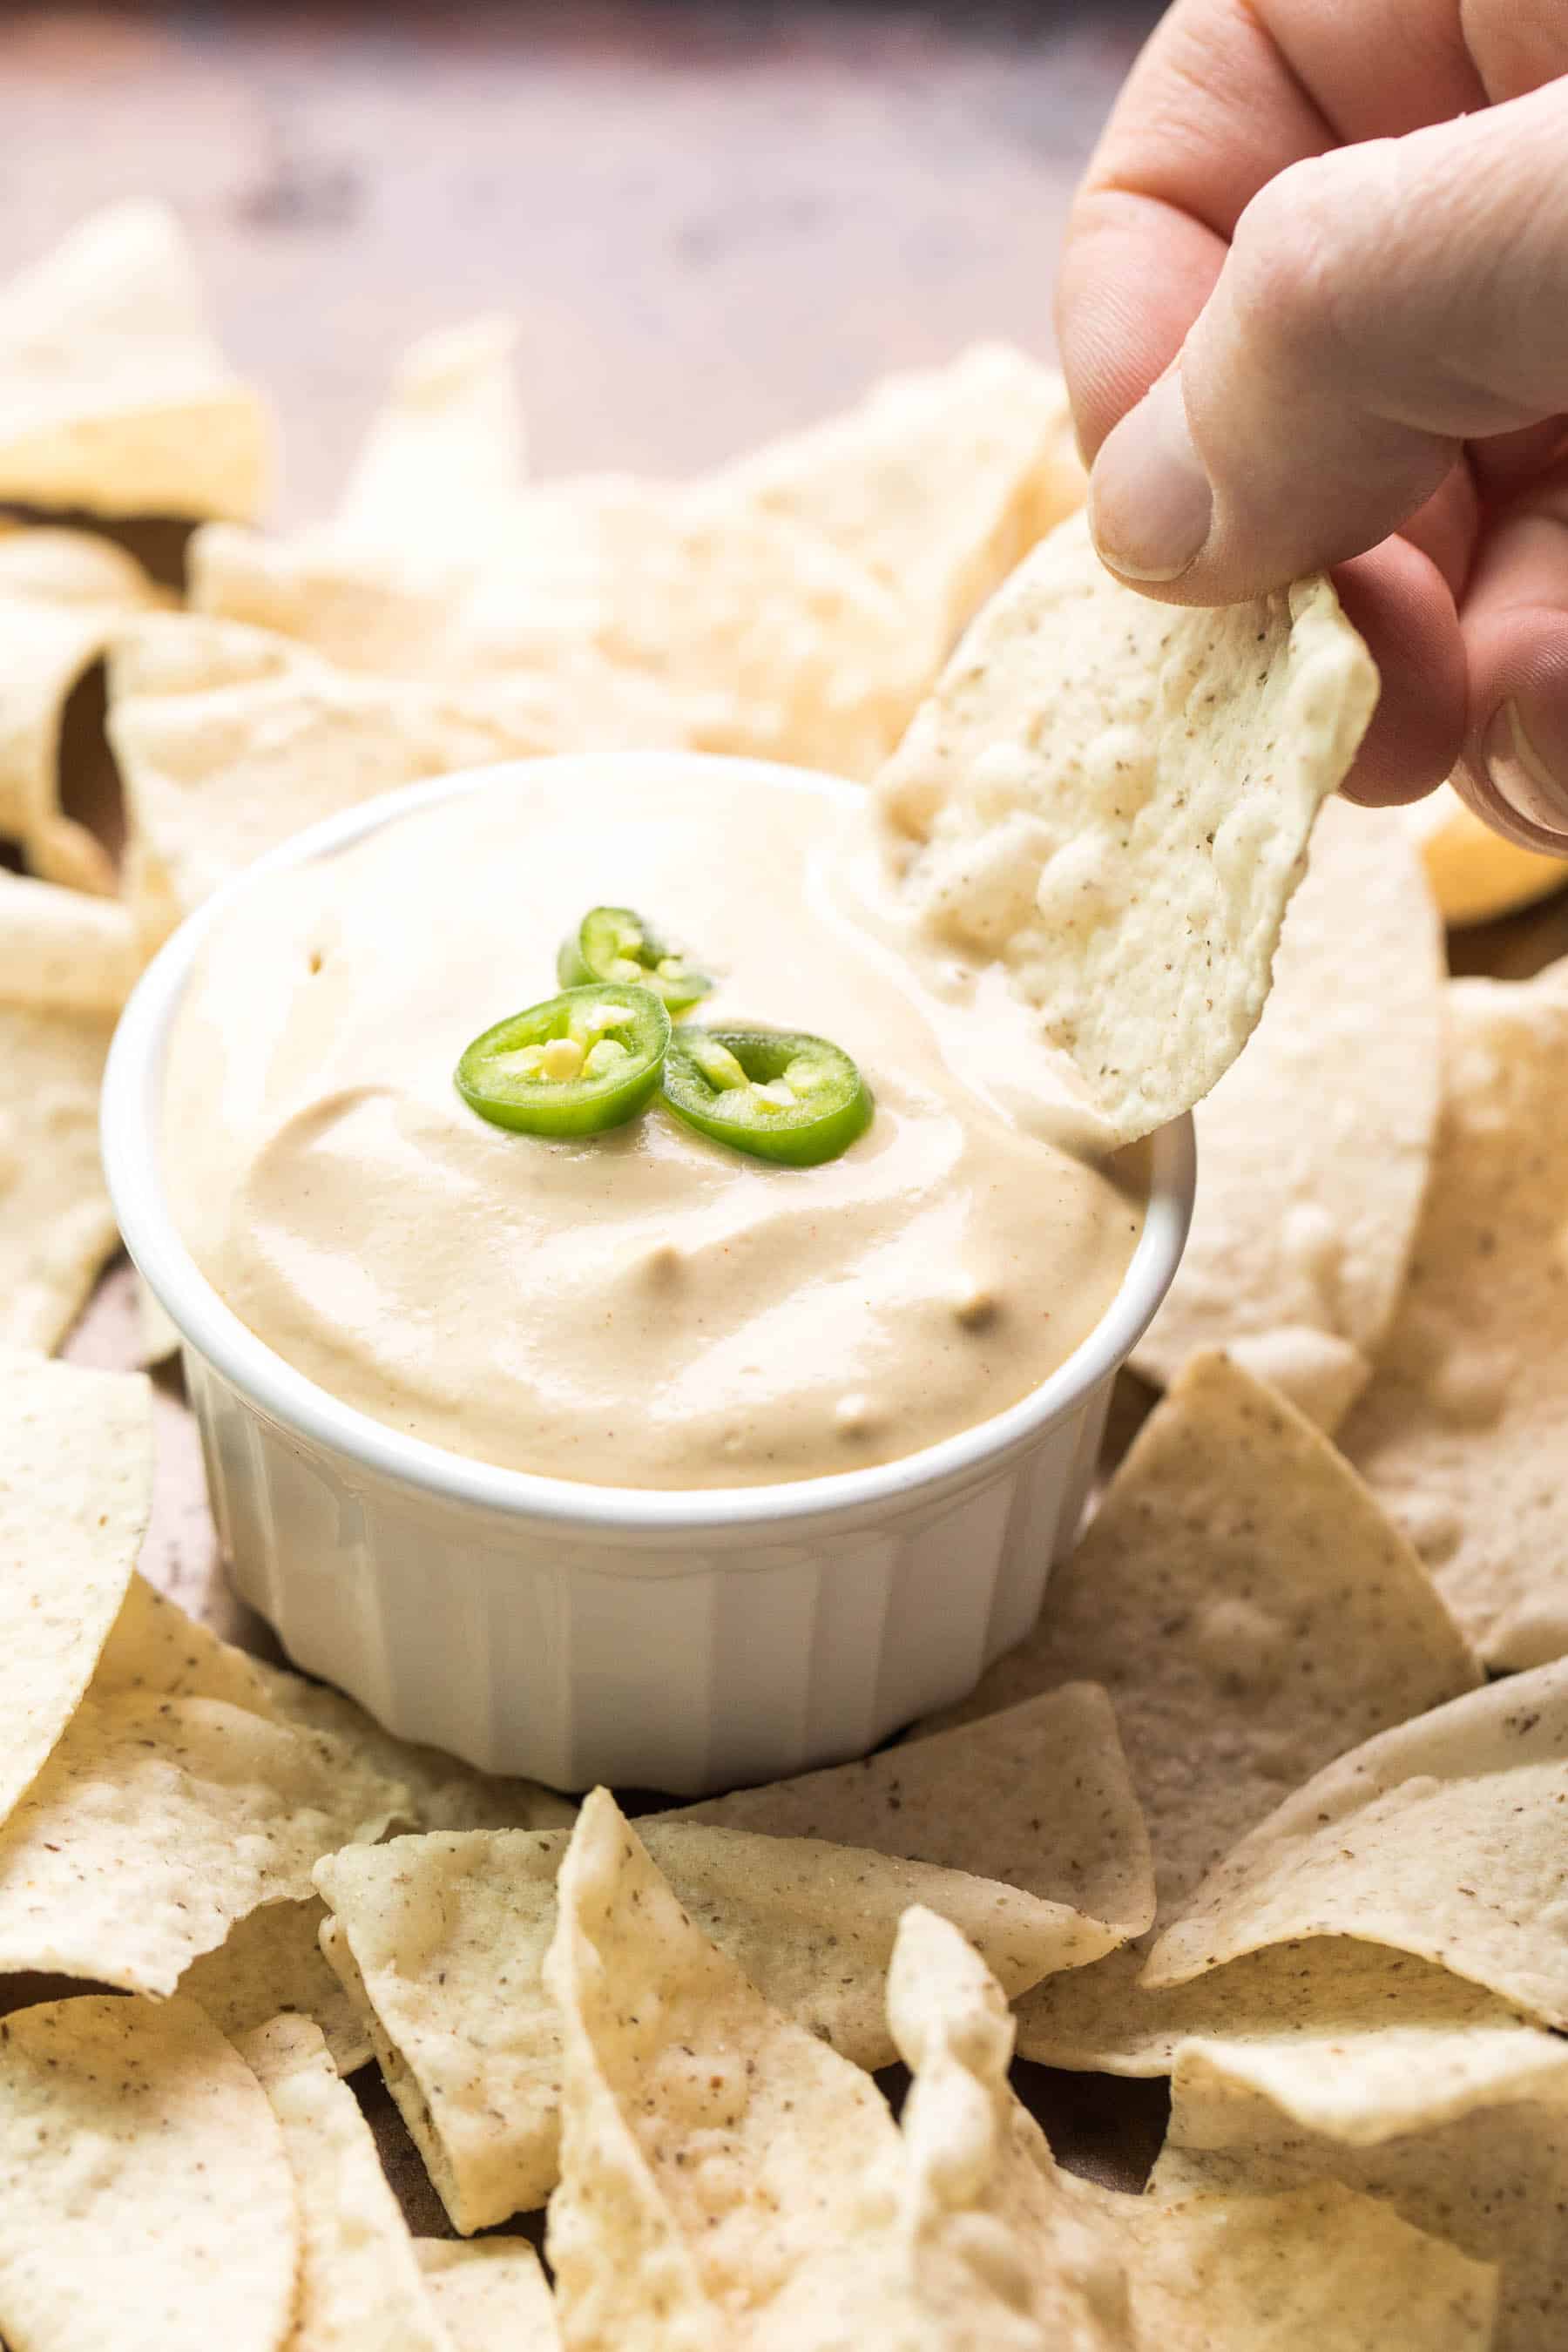 hand dipping a tortilla chip in queso nacho cheese in a white bowl